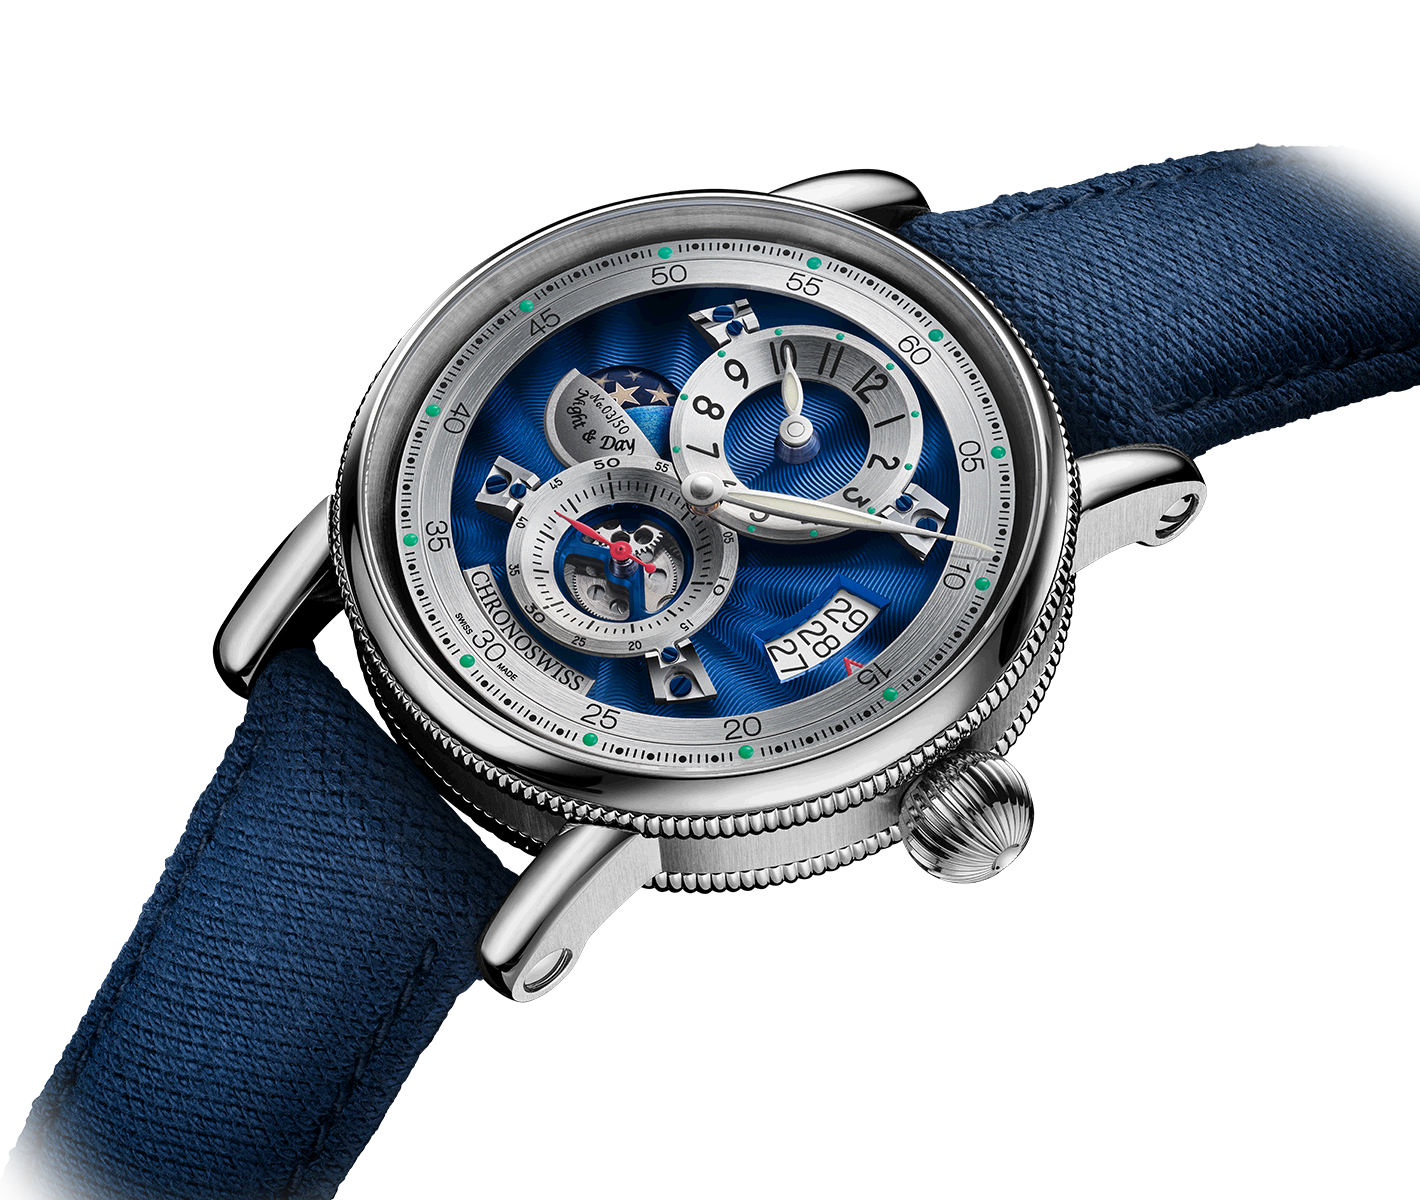 Chronoswiss introduces The Delphis Sapphire